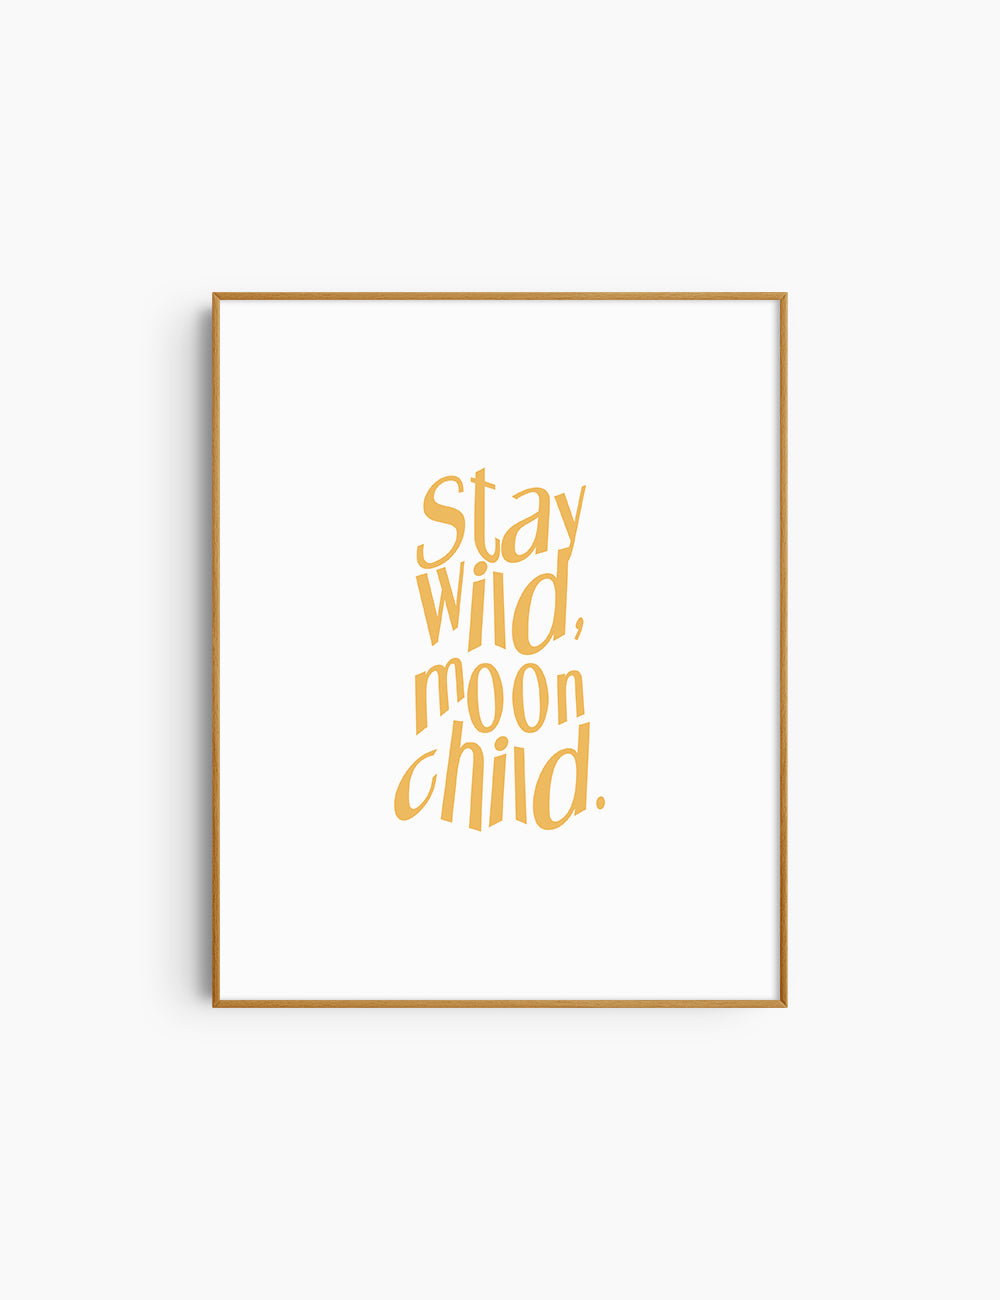 STAY WILD, MOON CHILD. Yellow and White. Printable Wall Art Quote.